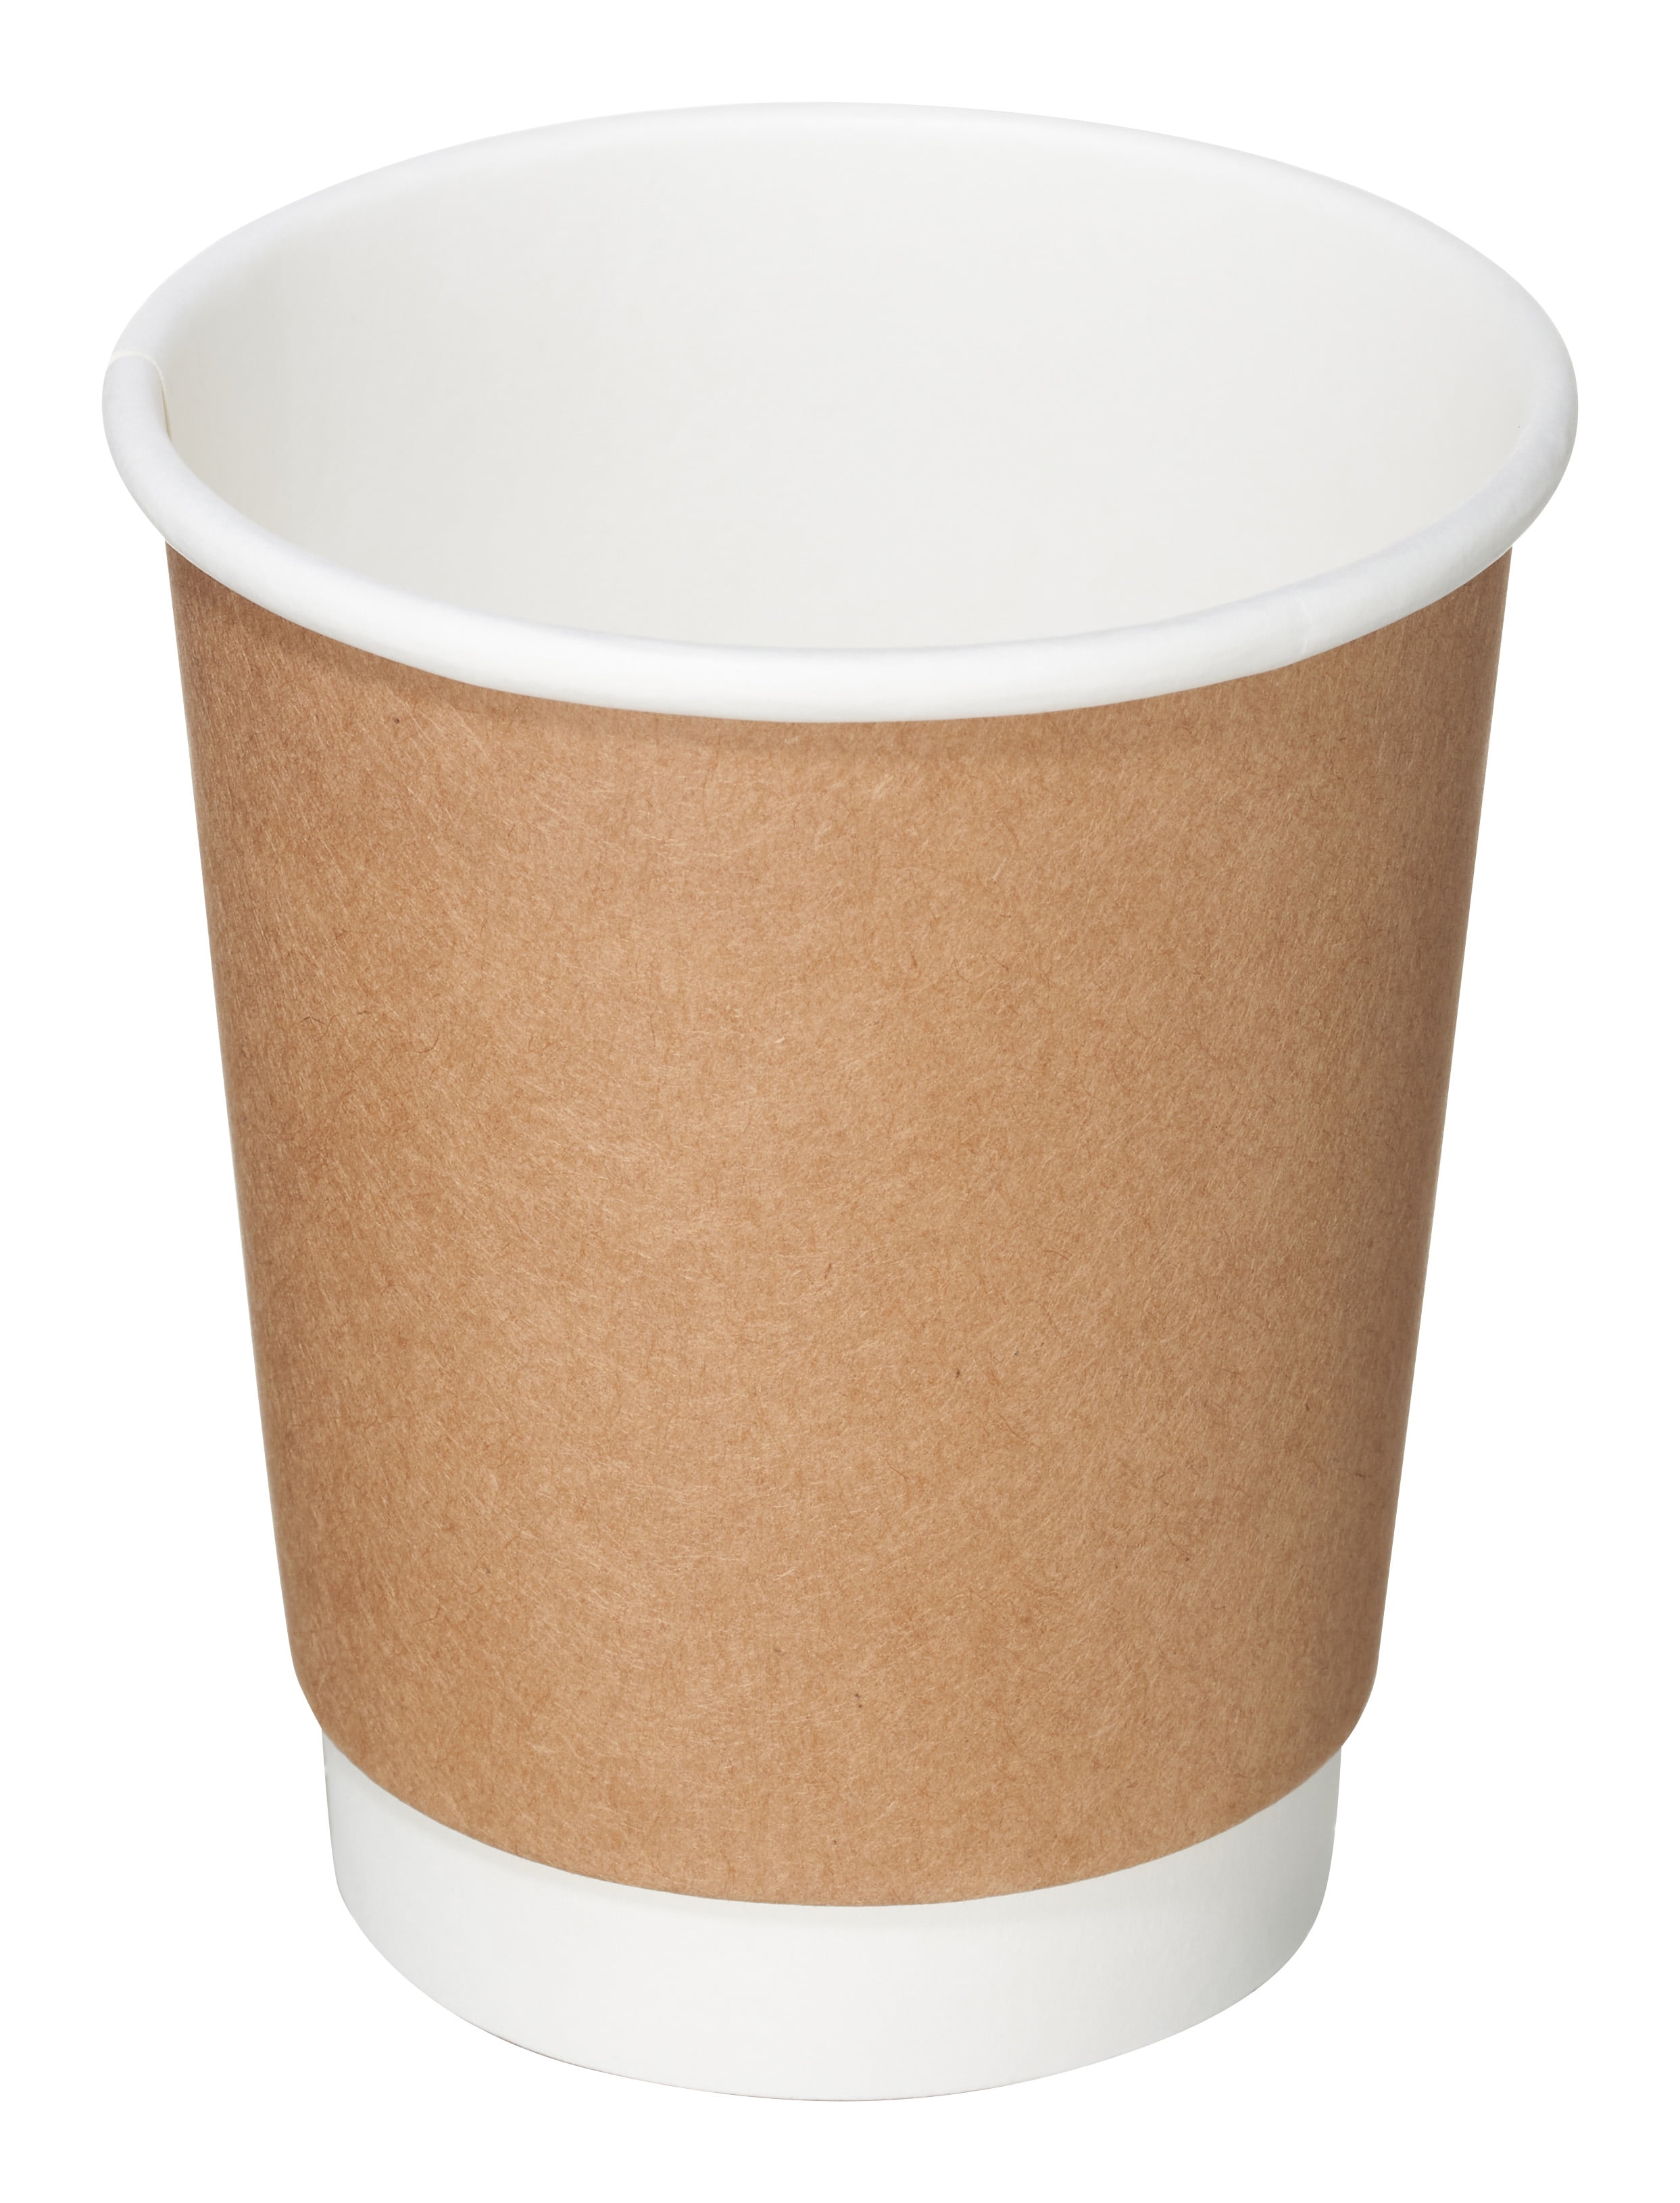 Biodegradable Paper Hot drinks Cups Recyclable Coffee Cup 8oz/230ml Set of 50 